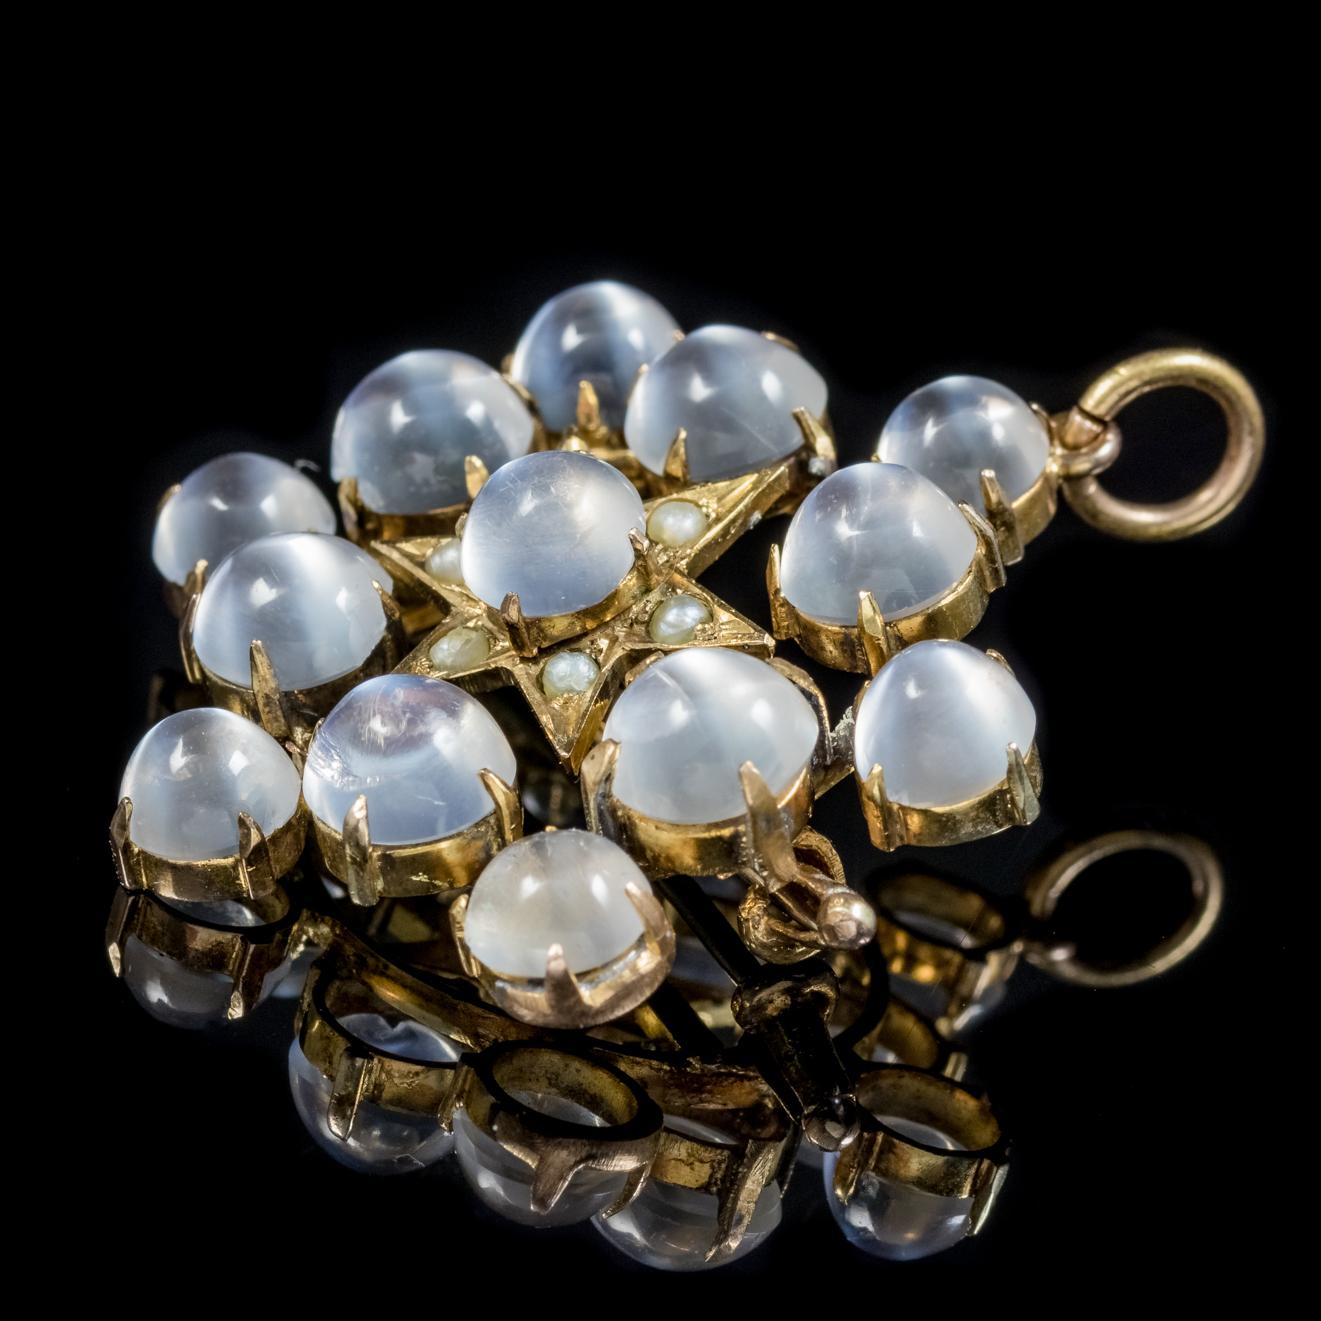 Antique Victorian Moonstone Pearl Star Pendant Brooch 18 Carat Gold, circa 1880 In Excellent Condition For Sale In Lancaster, Lancashire